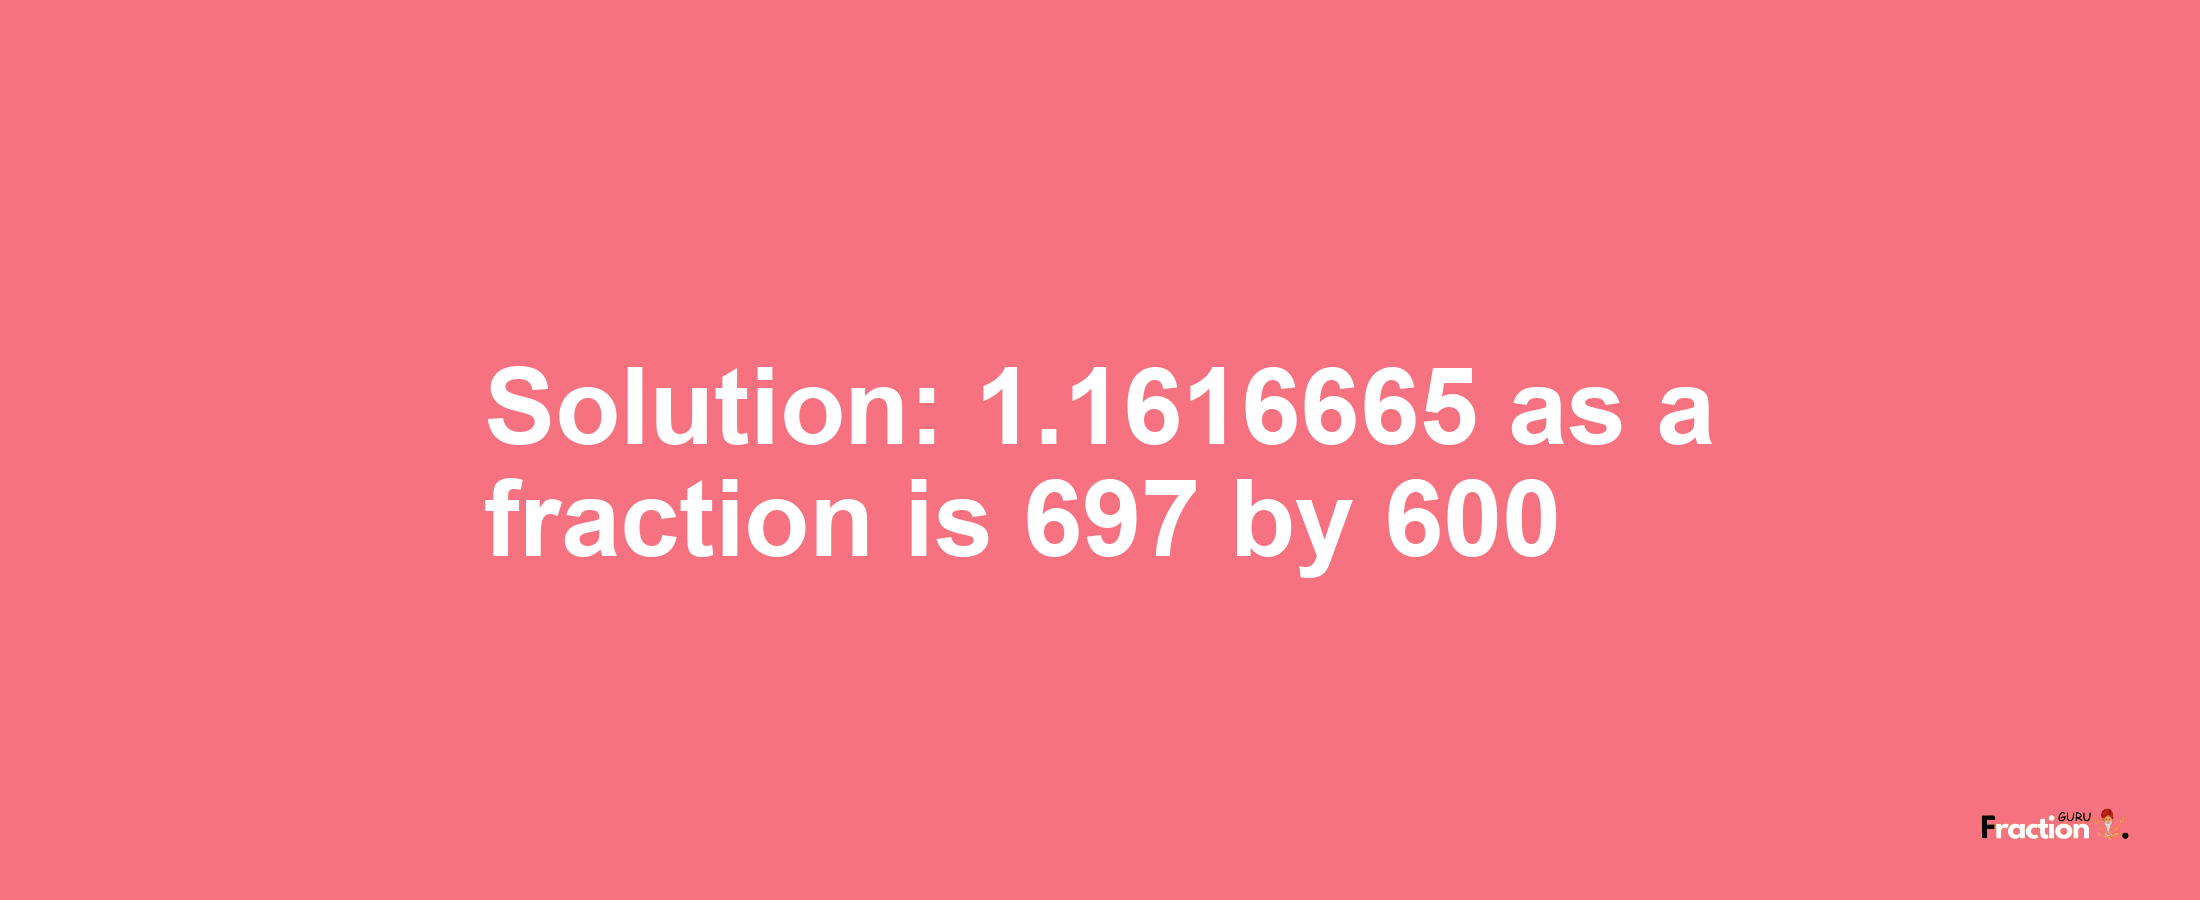 Solution:1.1616665 as a fraction is 697/600